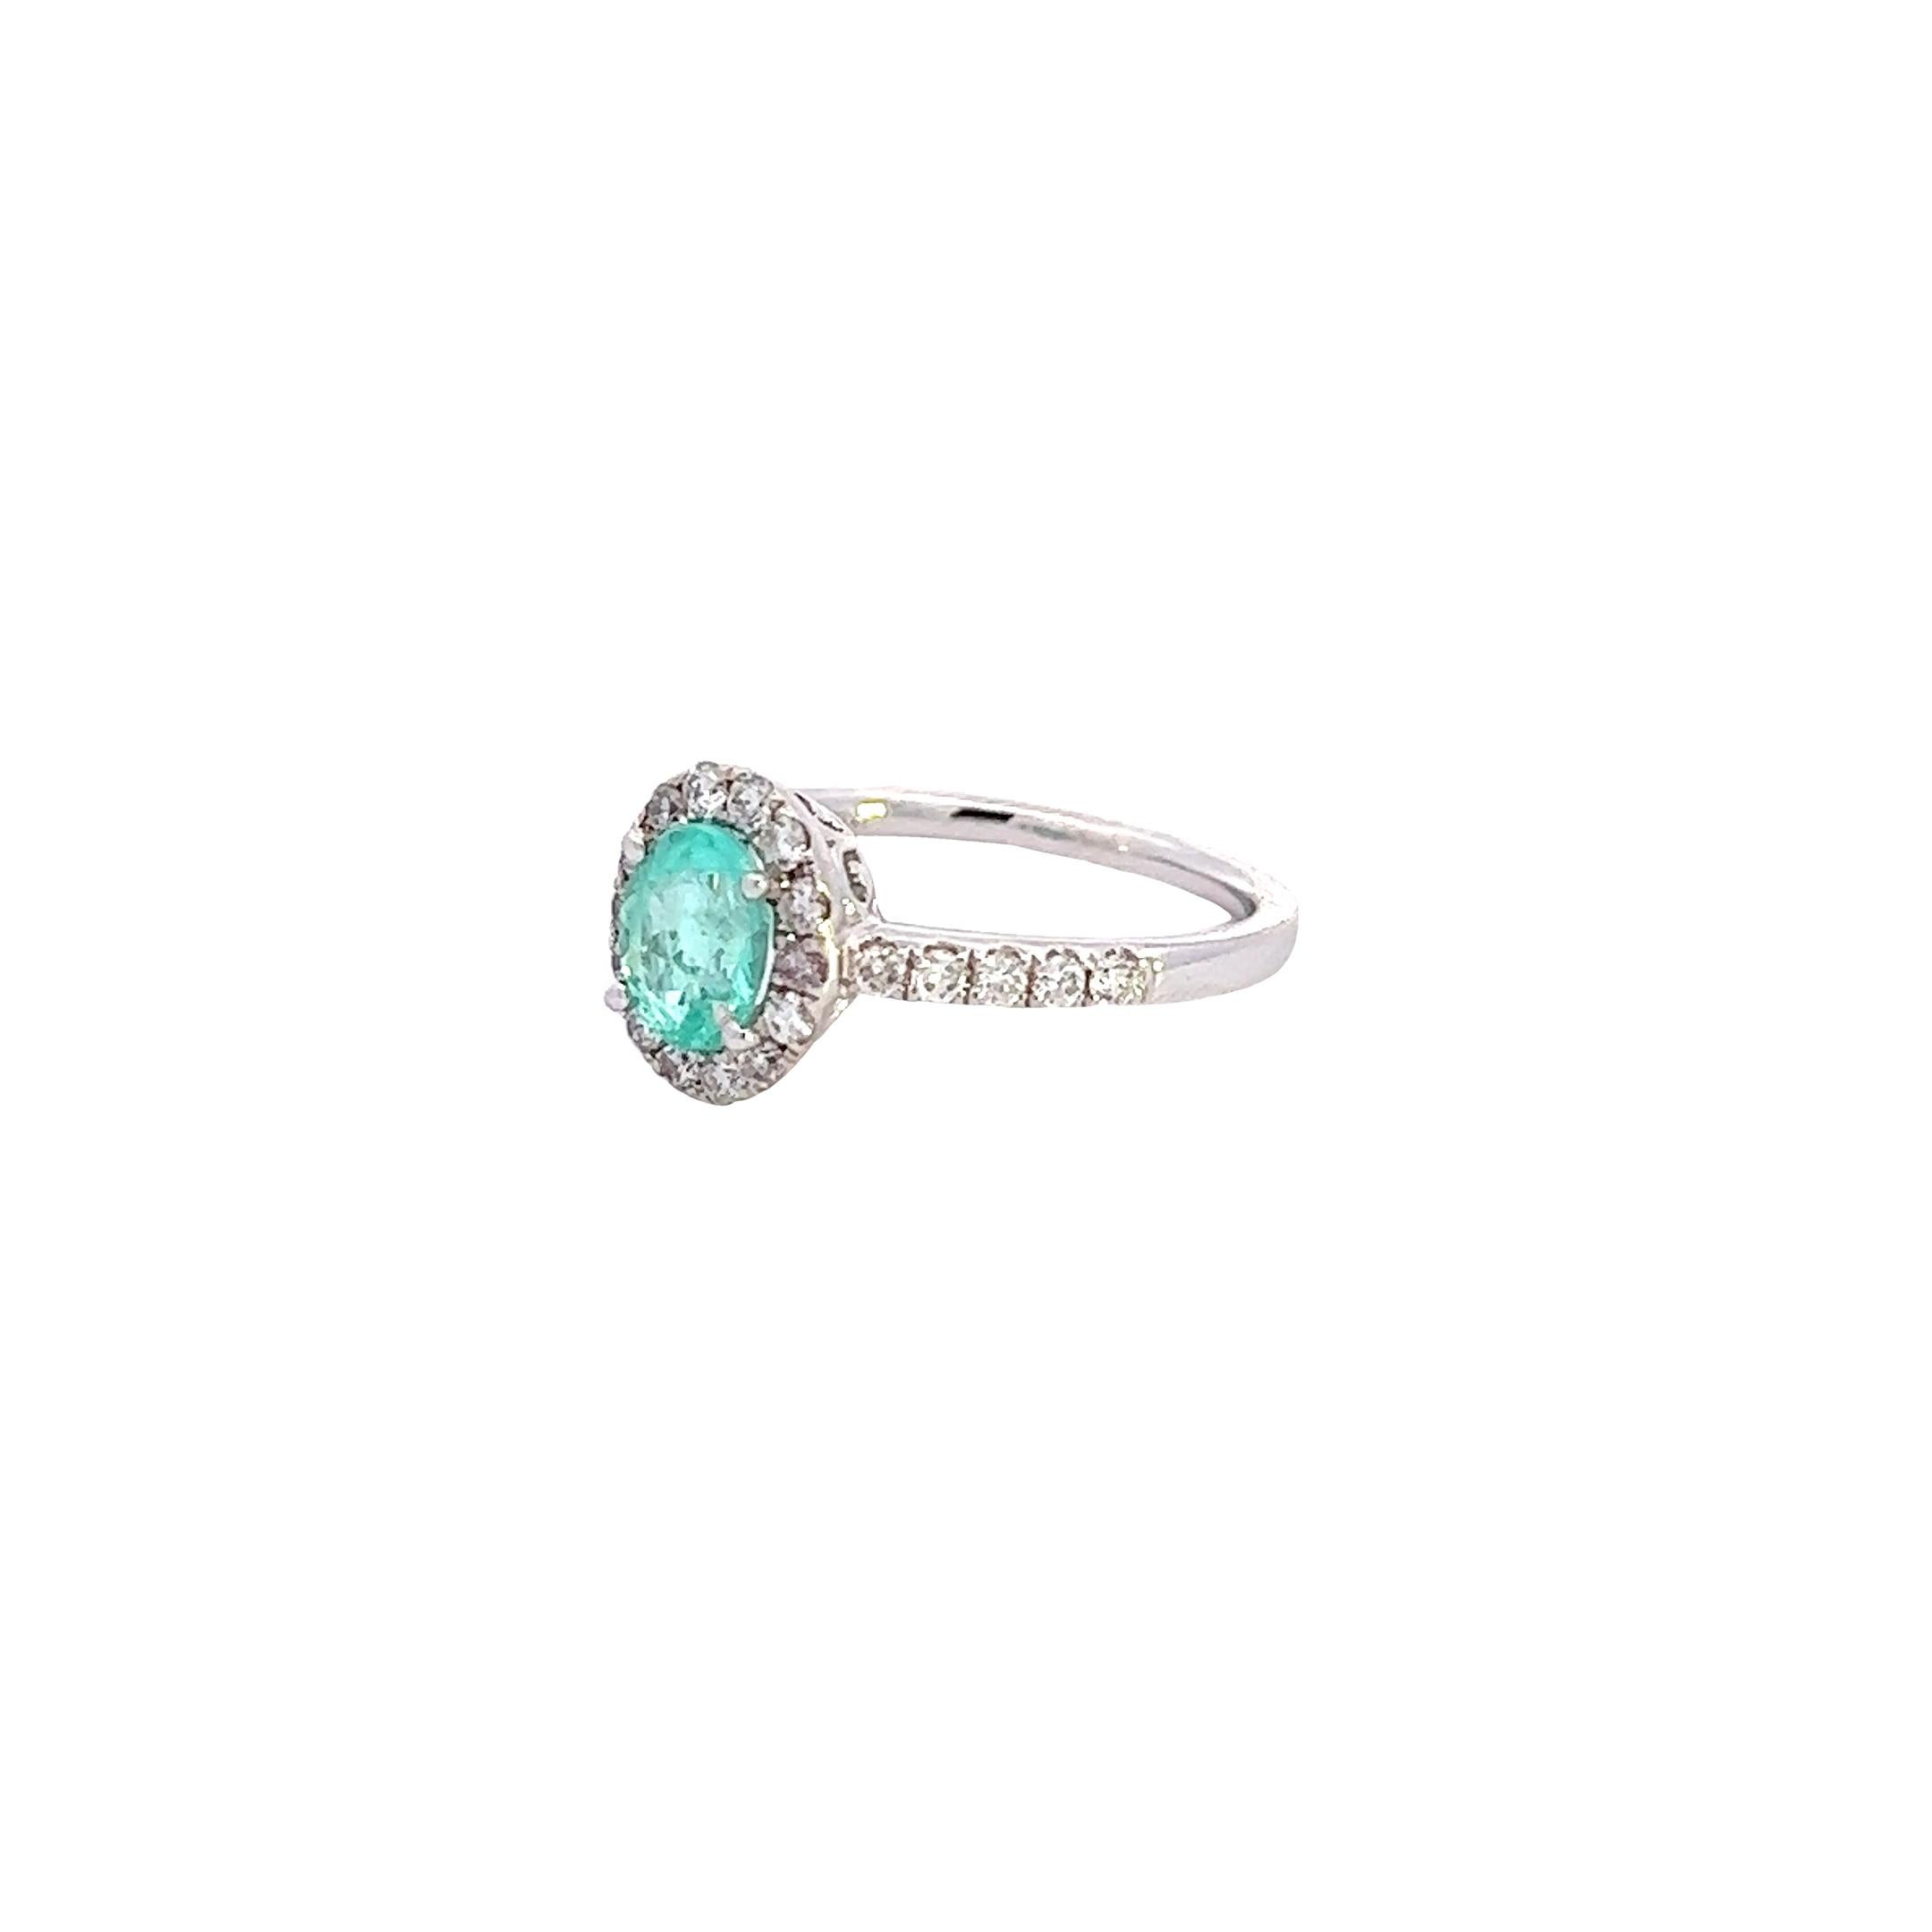 For Sale:  Elegant 14k White Gold Paraiba Tourmaline Ring with Oval 0.89ct Natural Gemstone 2